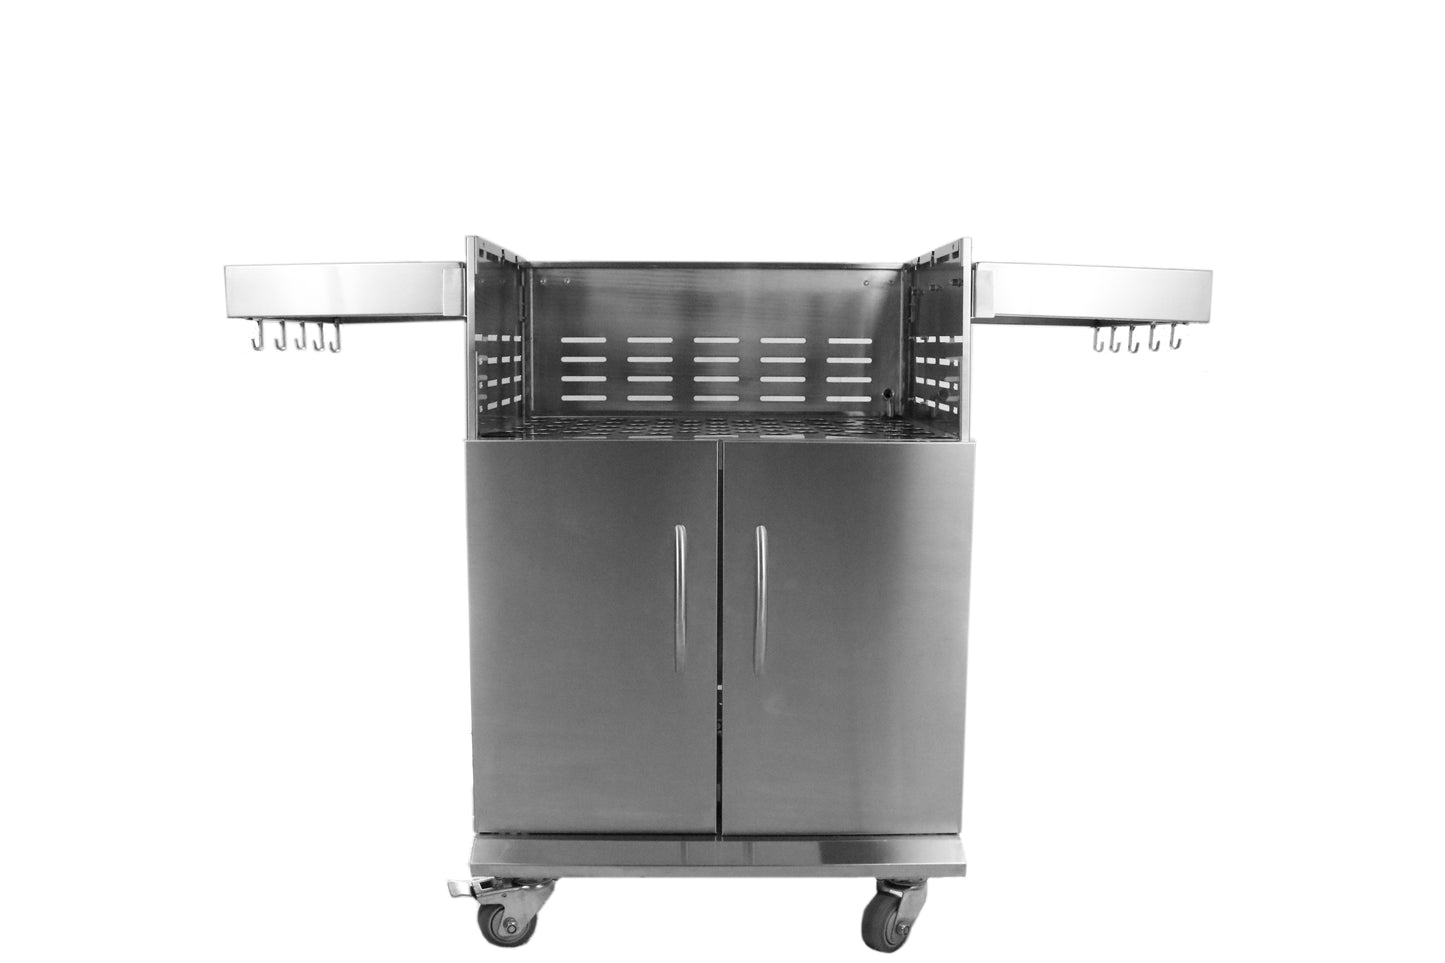 Jackson Grills Supreme Built-in BBQ: 550 Natural Gas or Propane